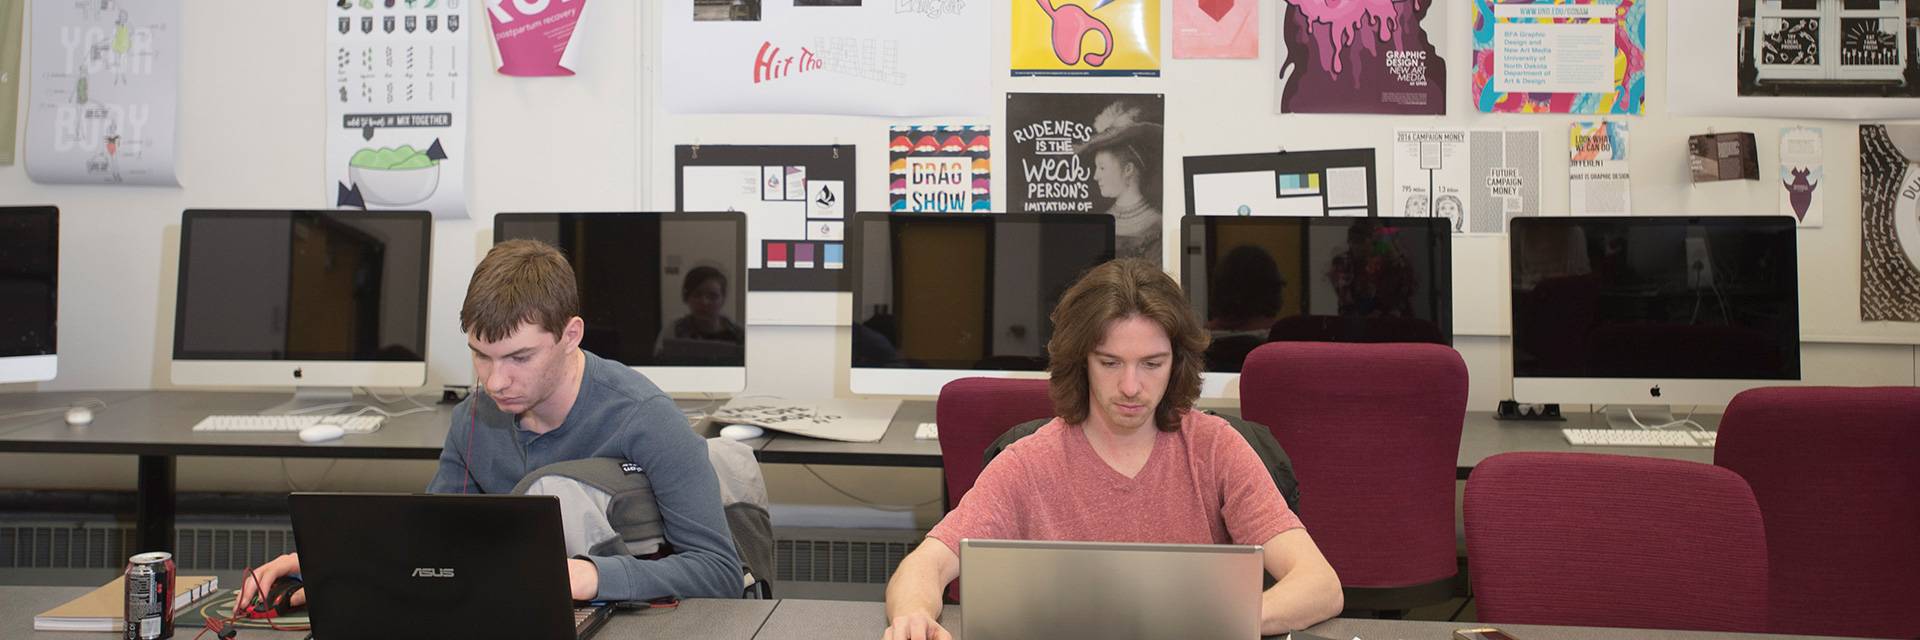 two students working on graphic design in UND classroom